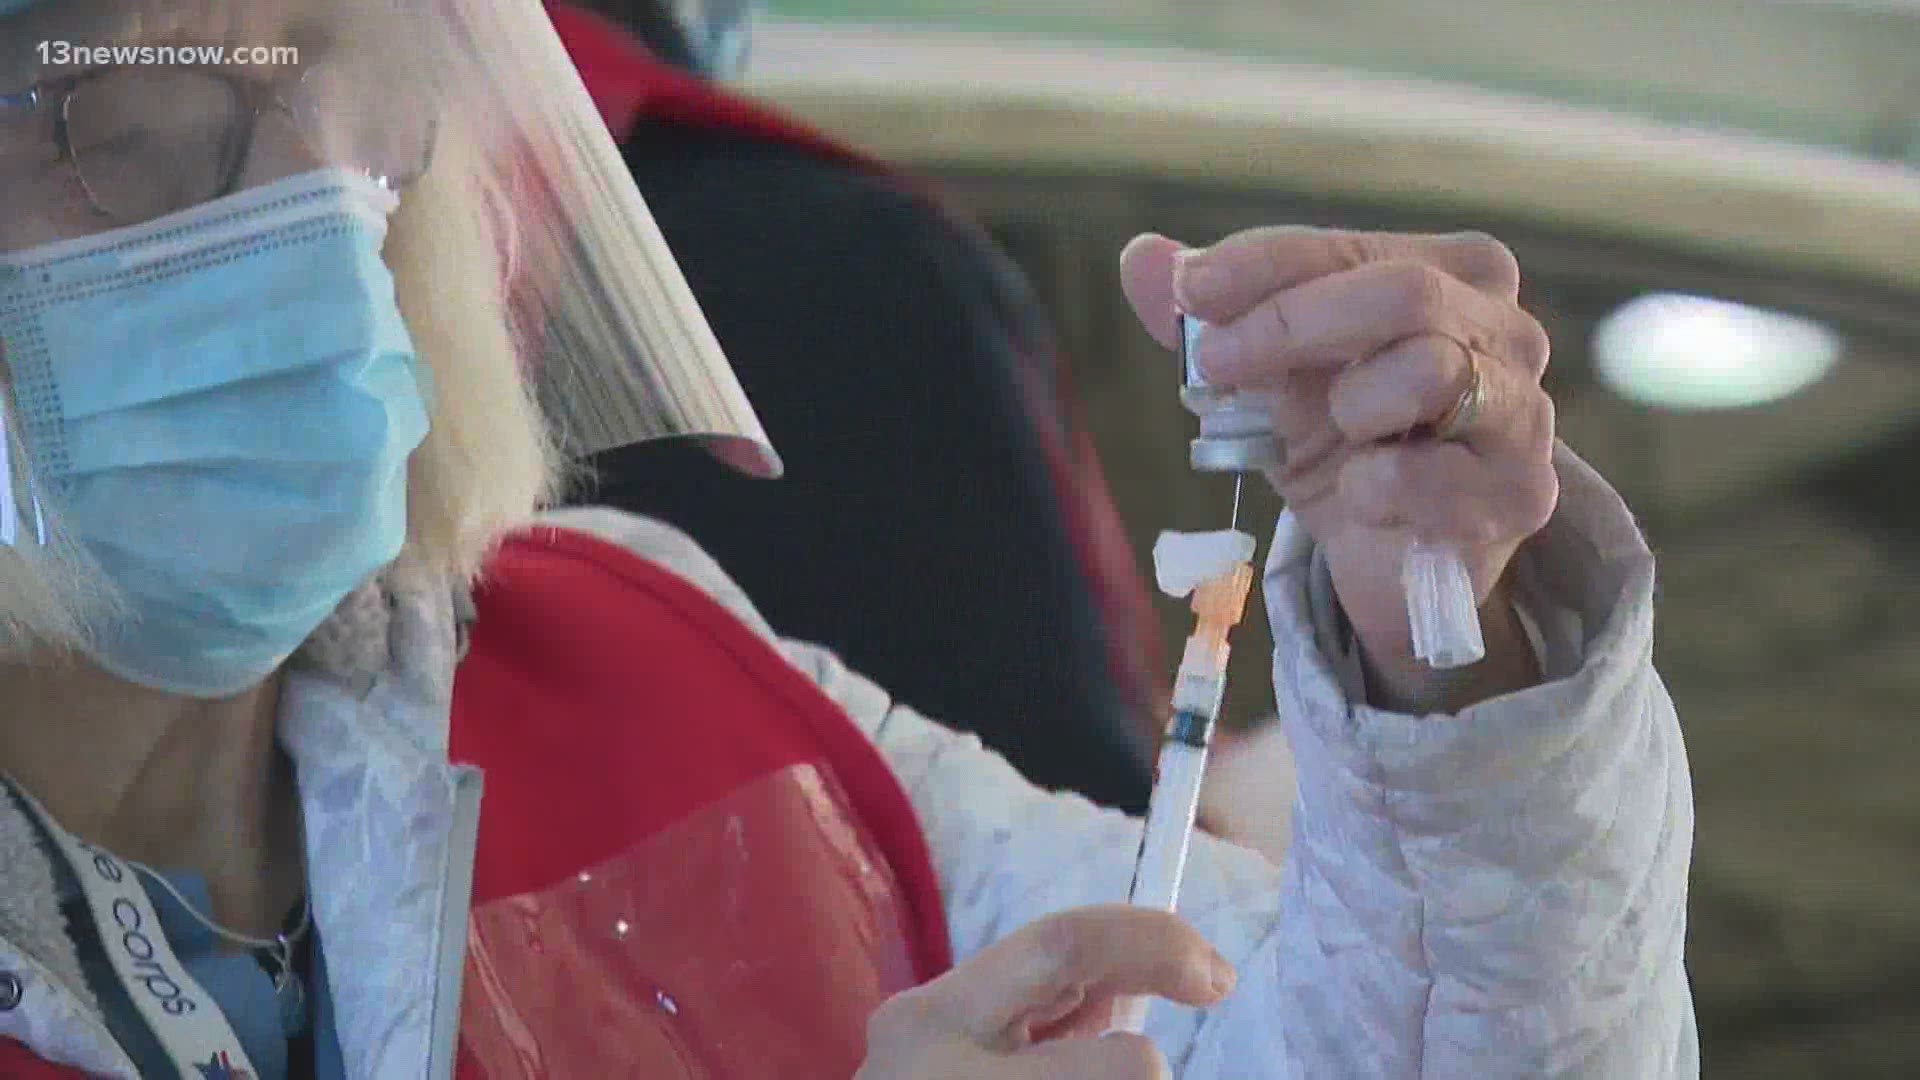 Monday, the 3 health departments will start offering vaccines to people with high-risk health conditions, certain essential workers and anyone who is 65 or older.